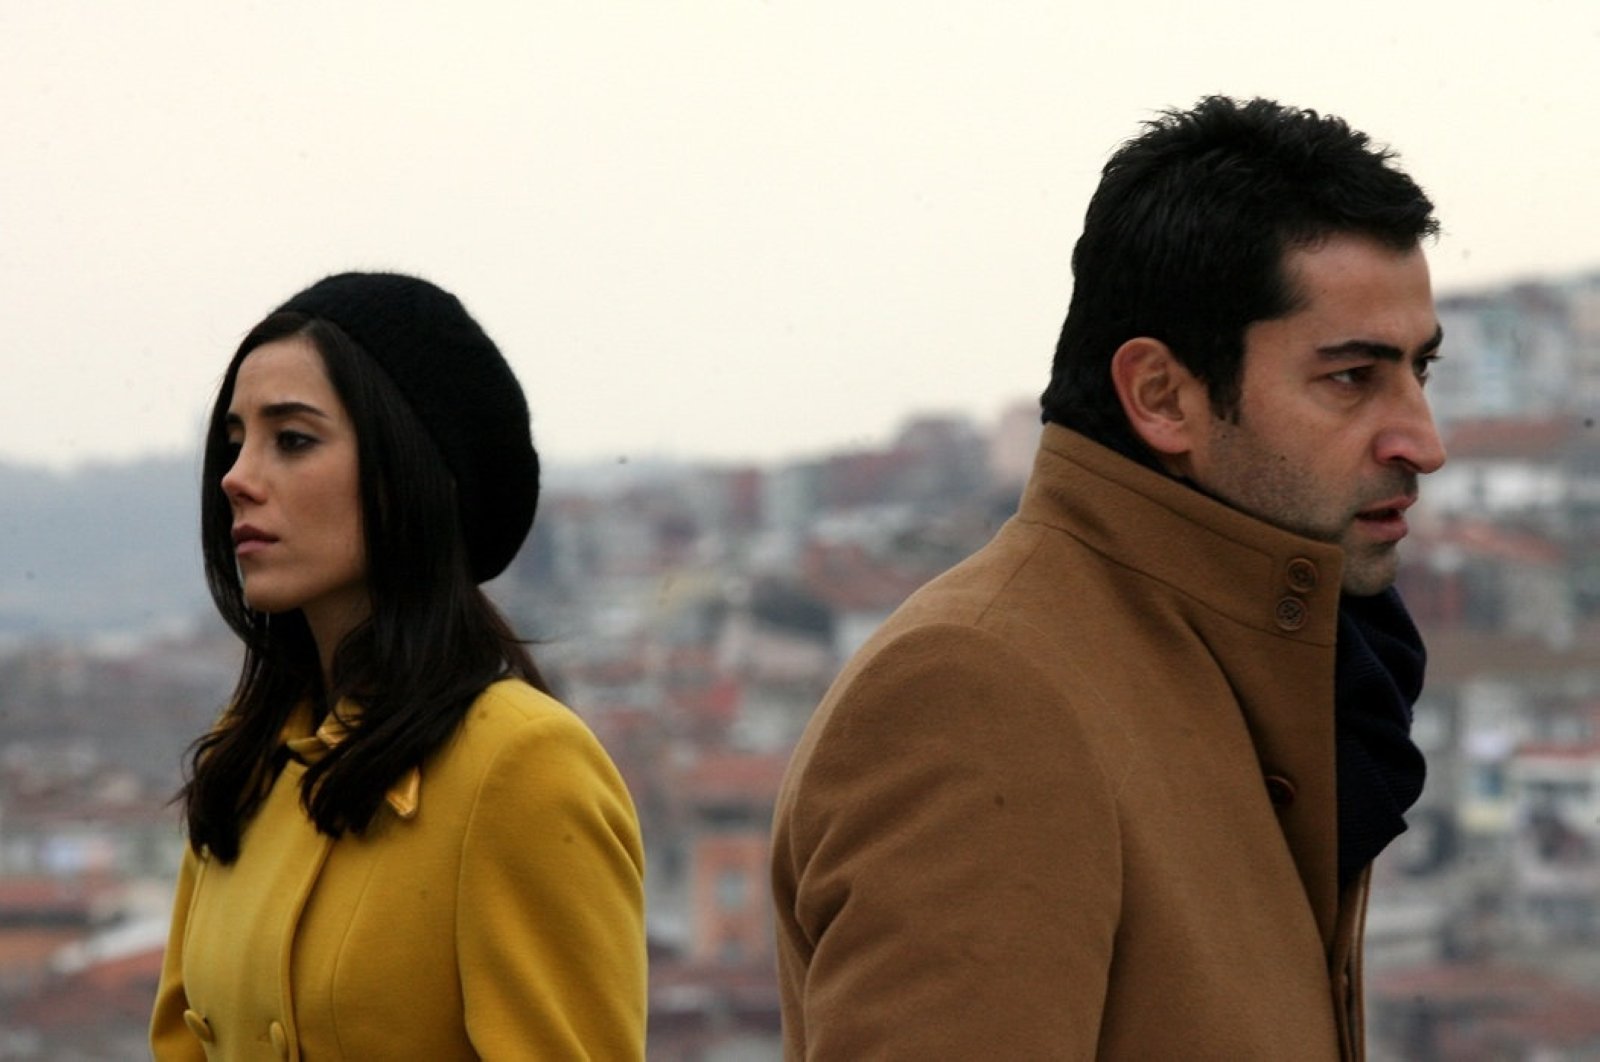 A scene showing Kenan İmirzalıoğlu and Cansu Dere, stars of the famous Turkish TV series "Ezel" that is broadcast in many countries worldwide. (Sabah File Photo)